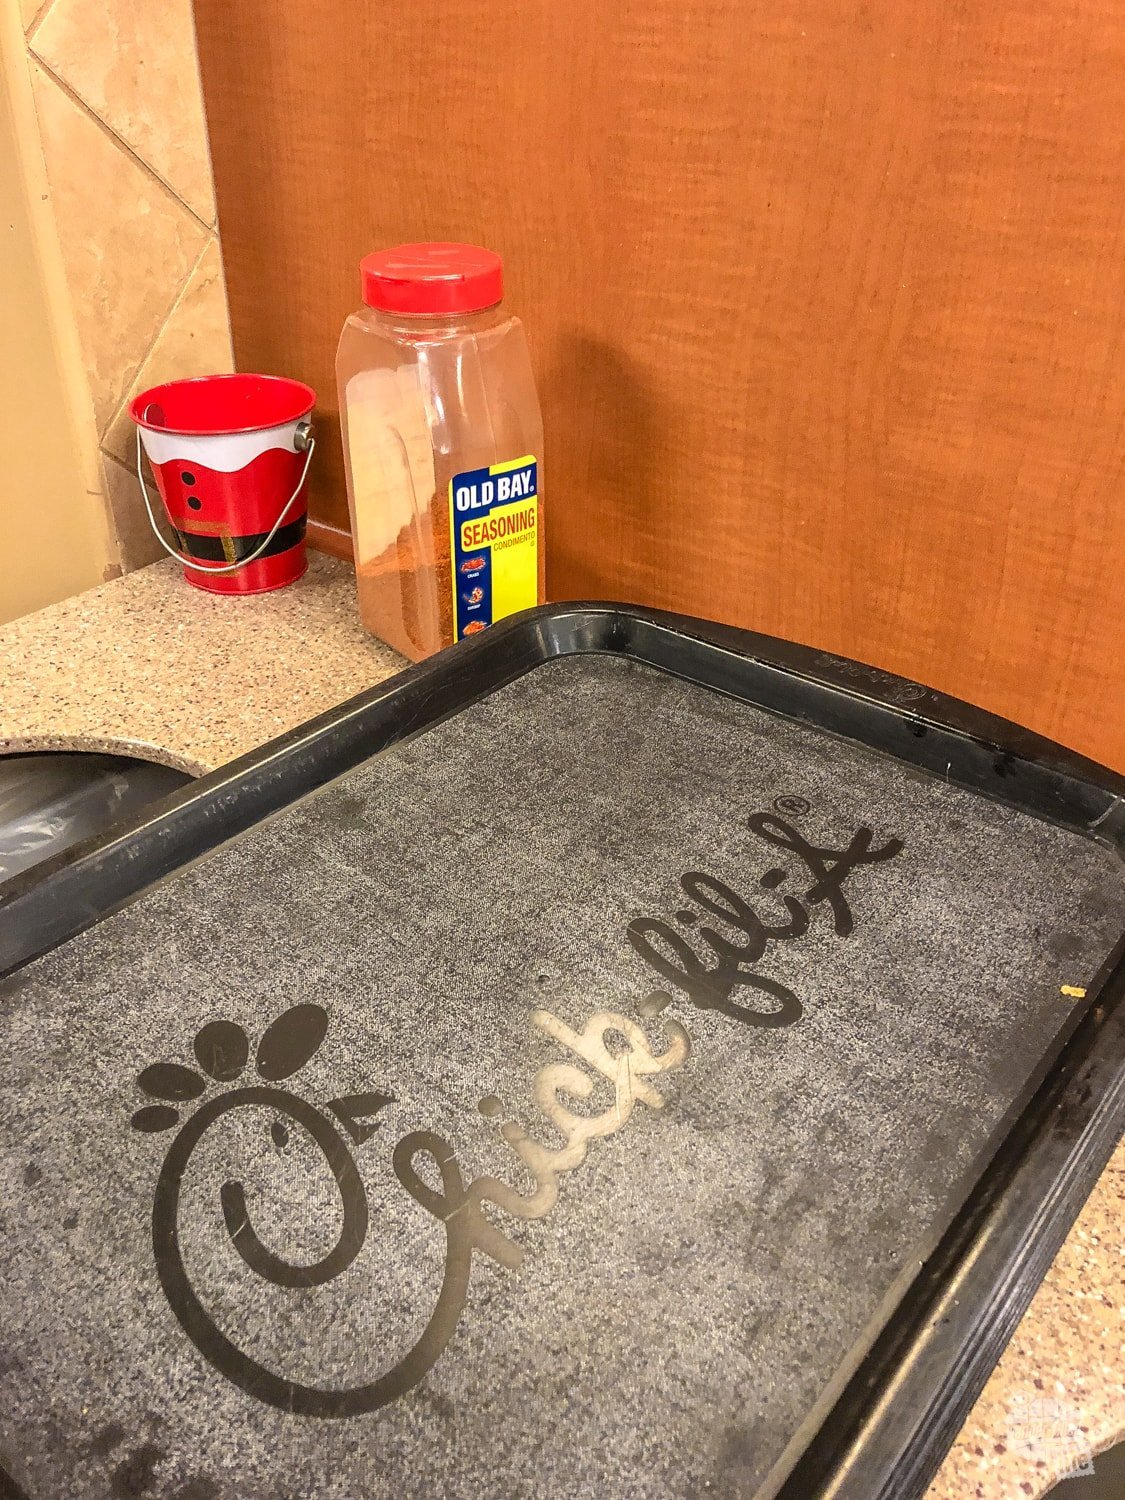 Old Bay Seasoning at Chick-Fil-A in Maryland.